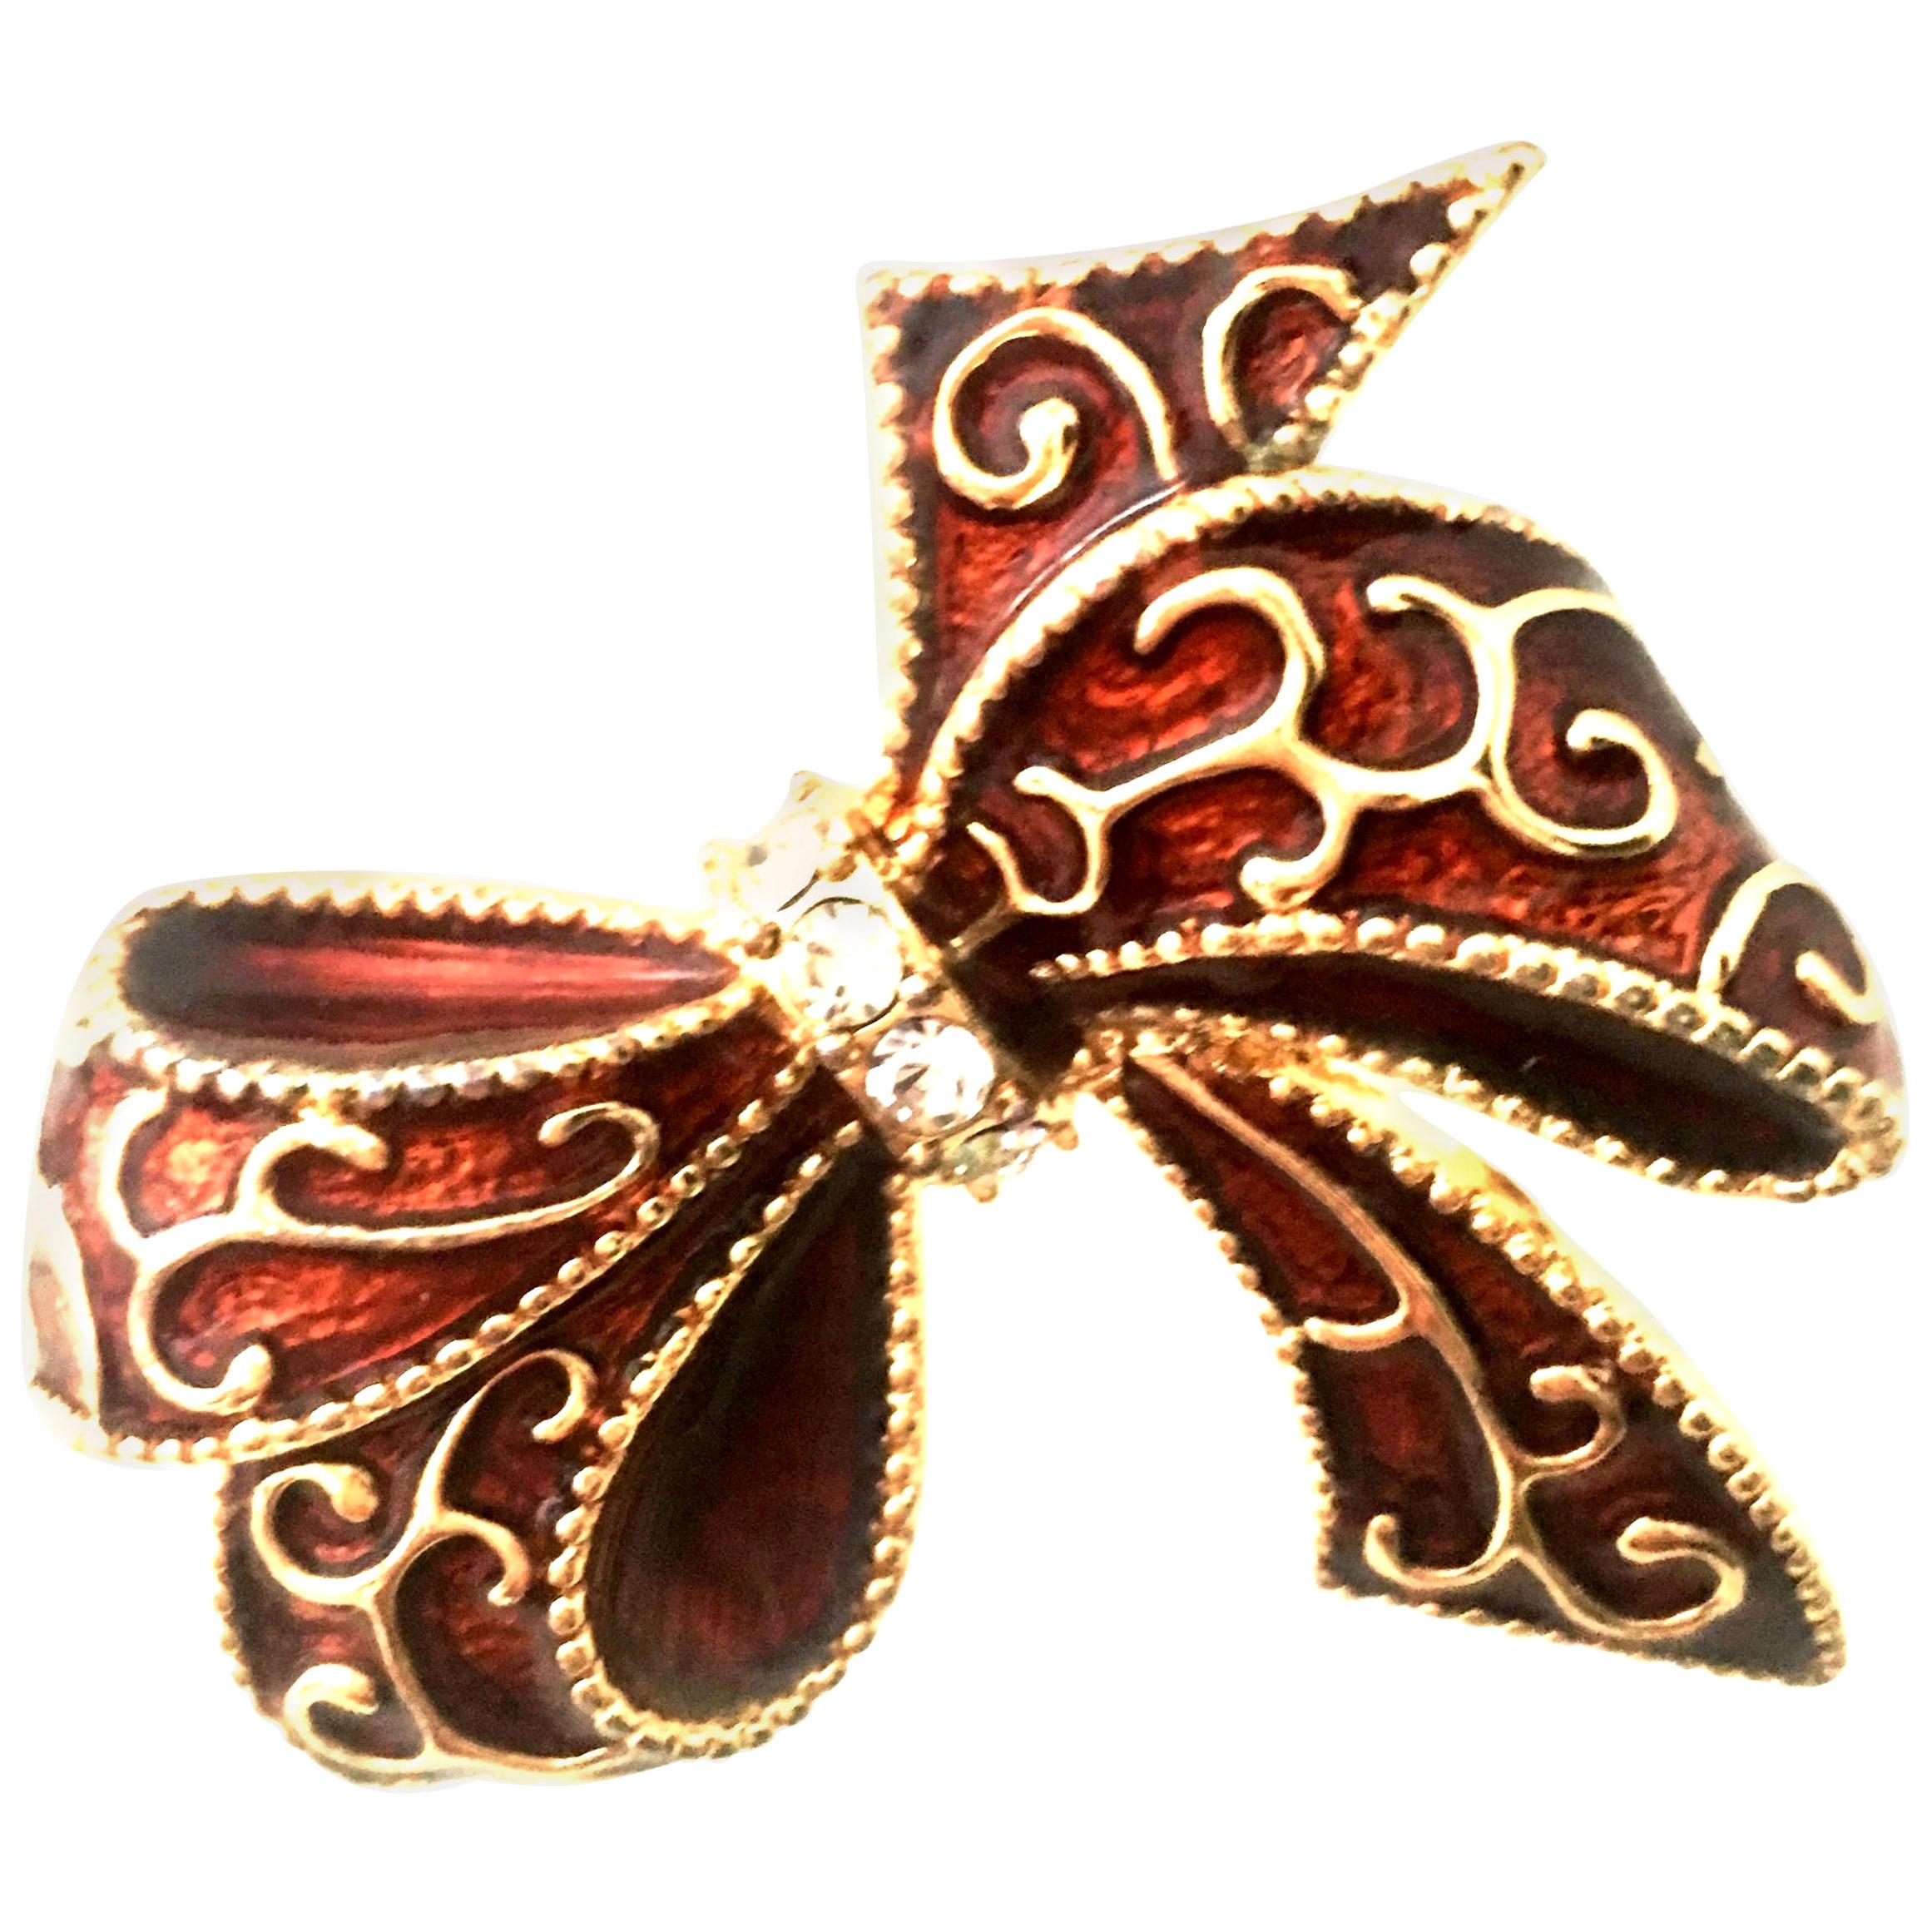  20th Century Monet Gold Enamel & Crystal Dimensional Holiday Bow Brooch  For Sale